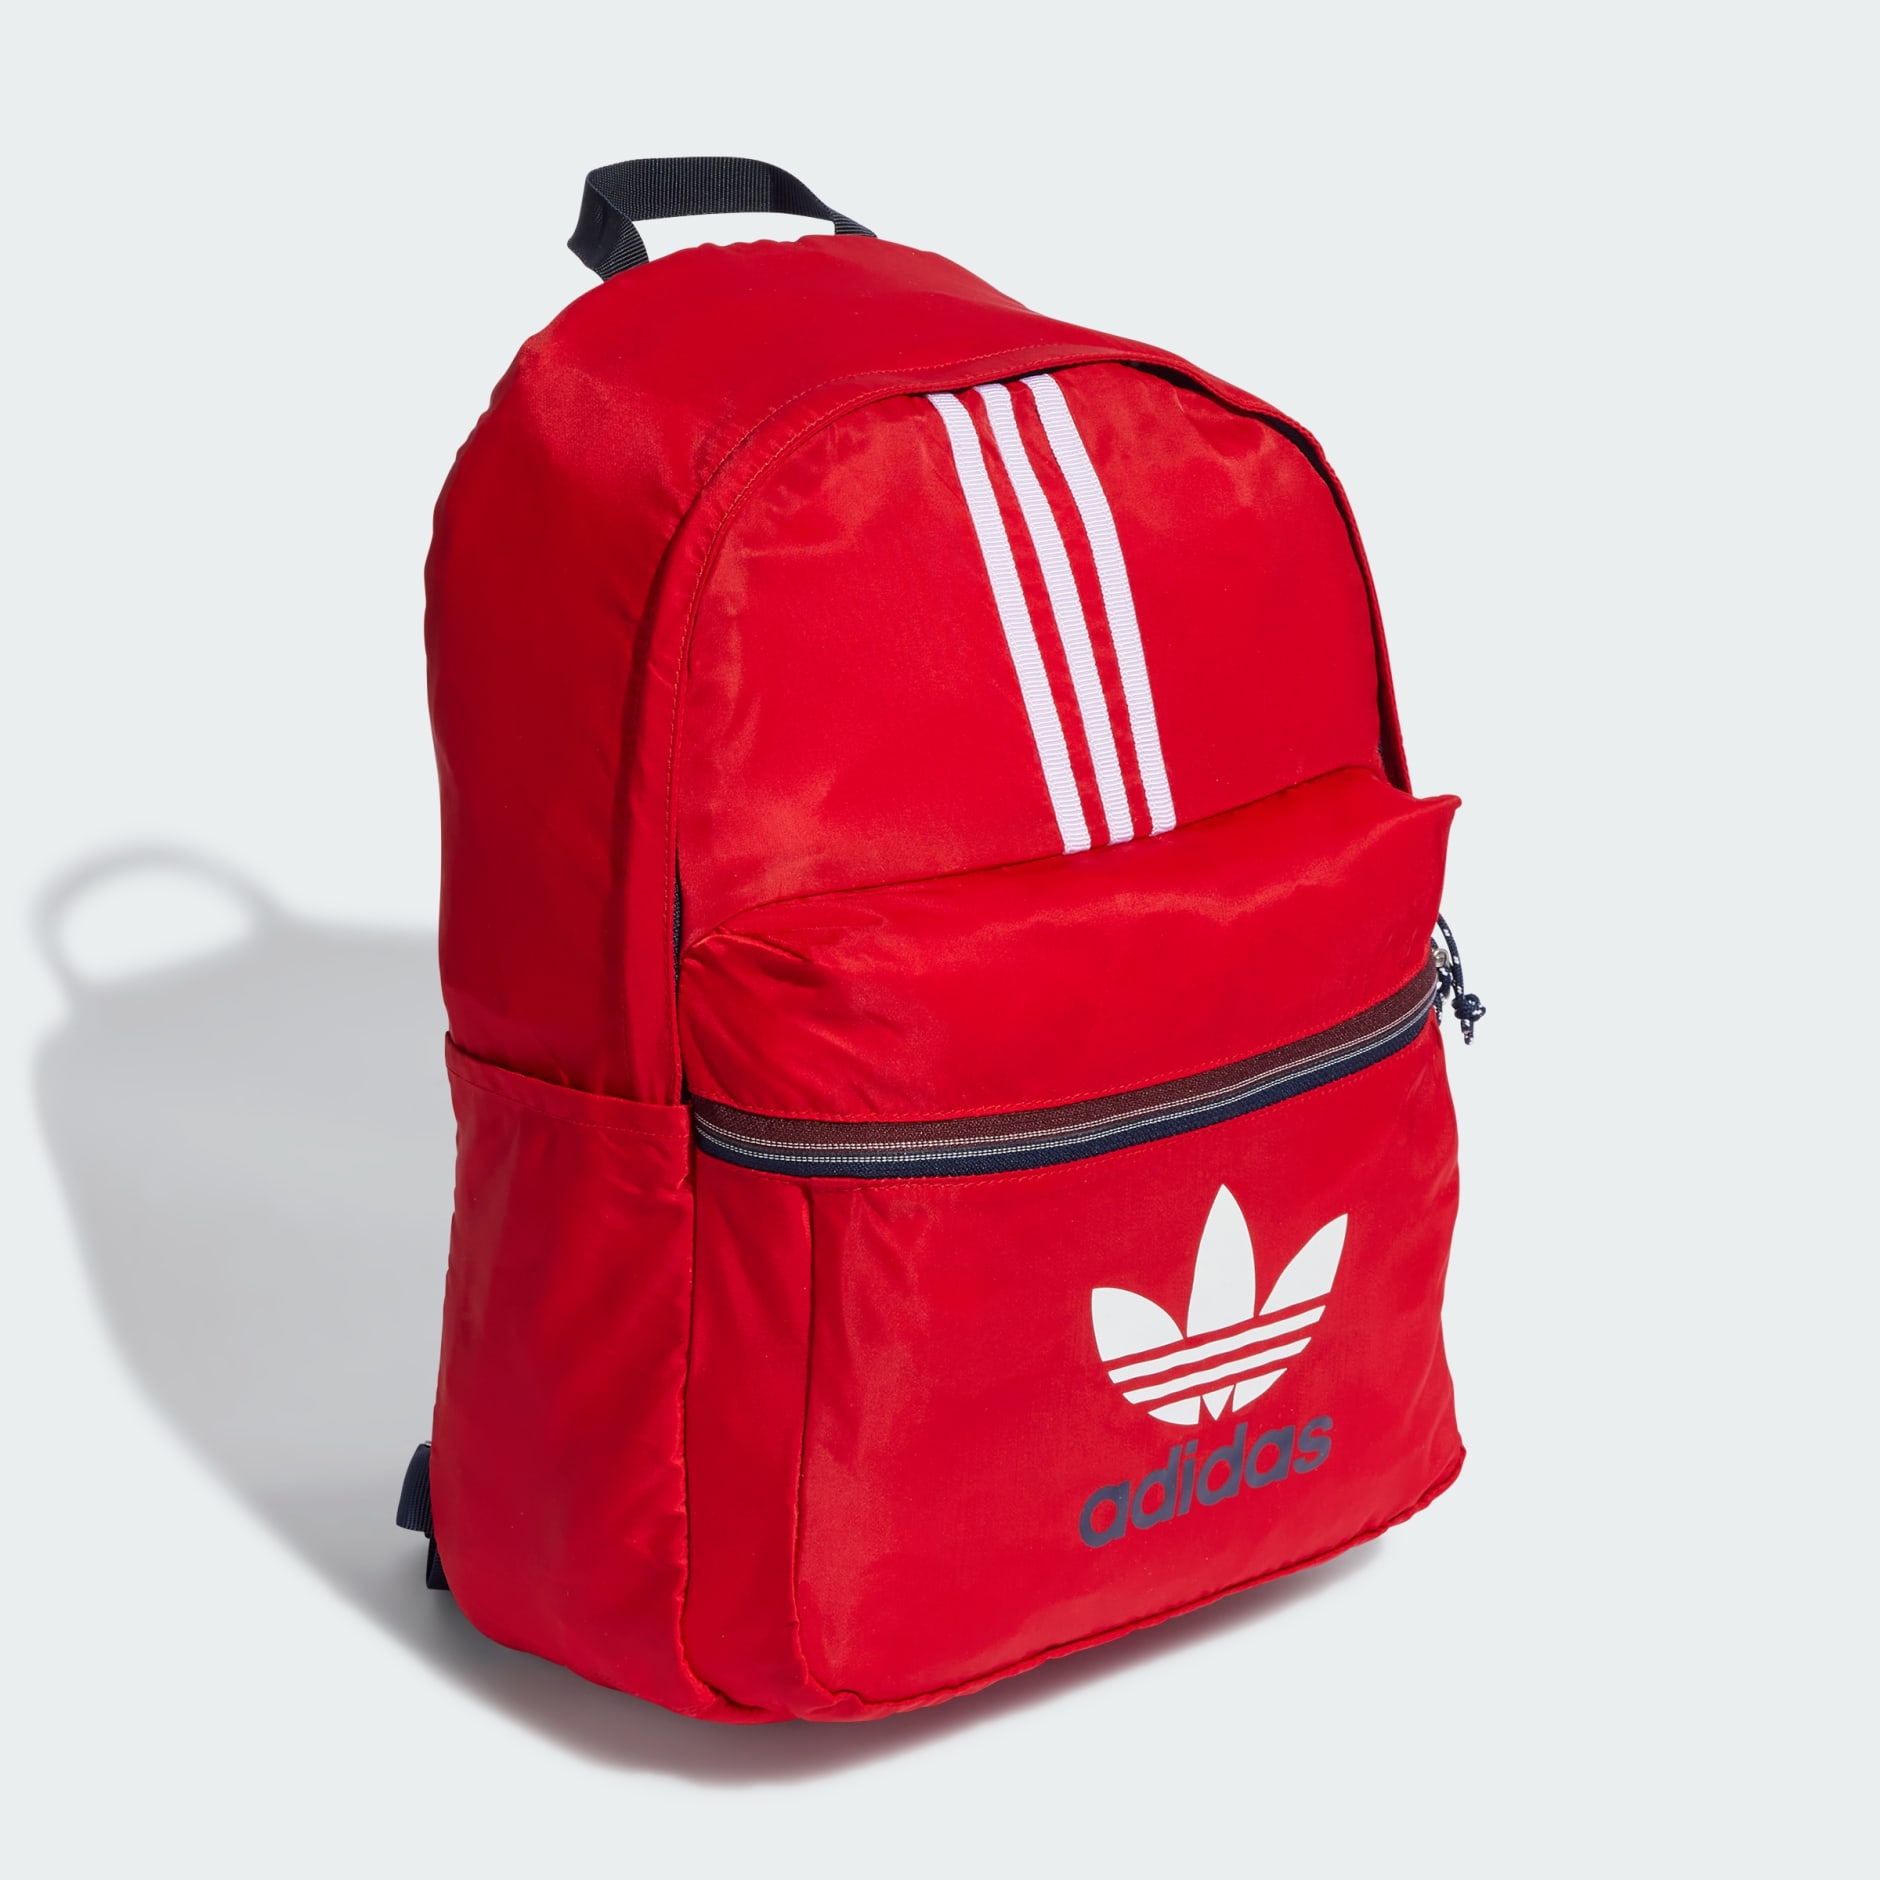 Accessories - Red Backpack | - Archive adidas Oman Adicolor